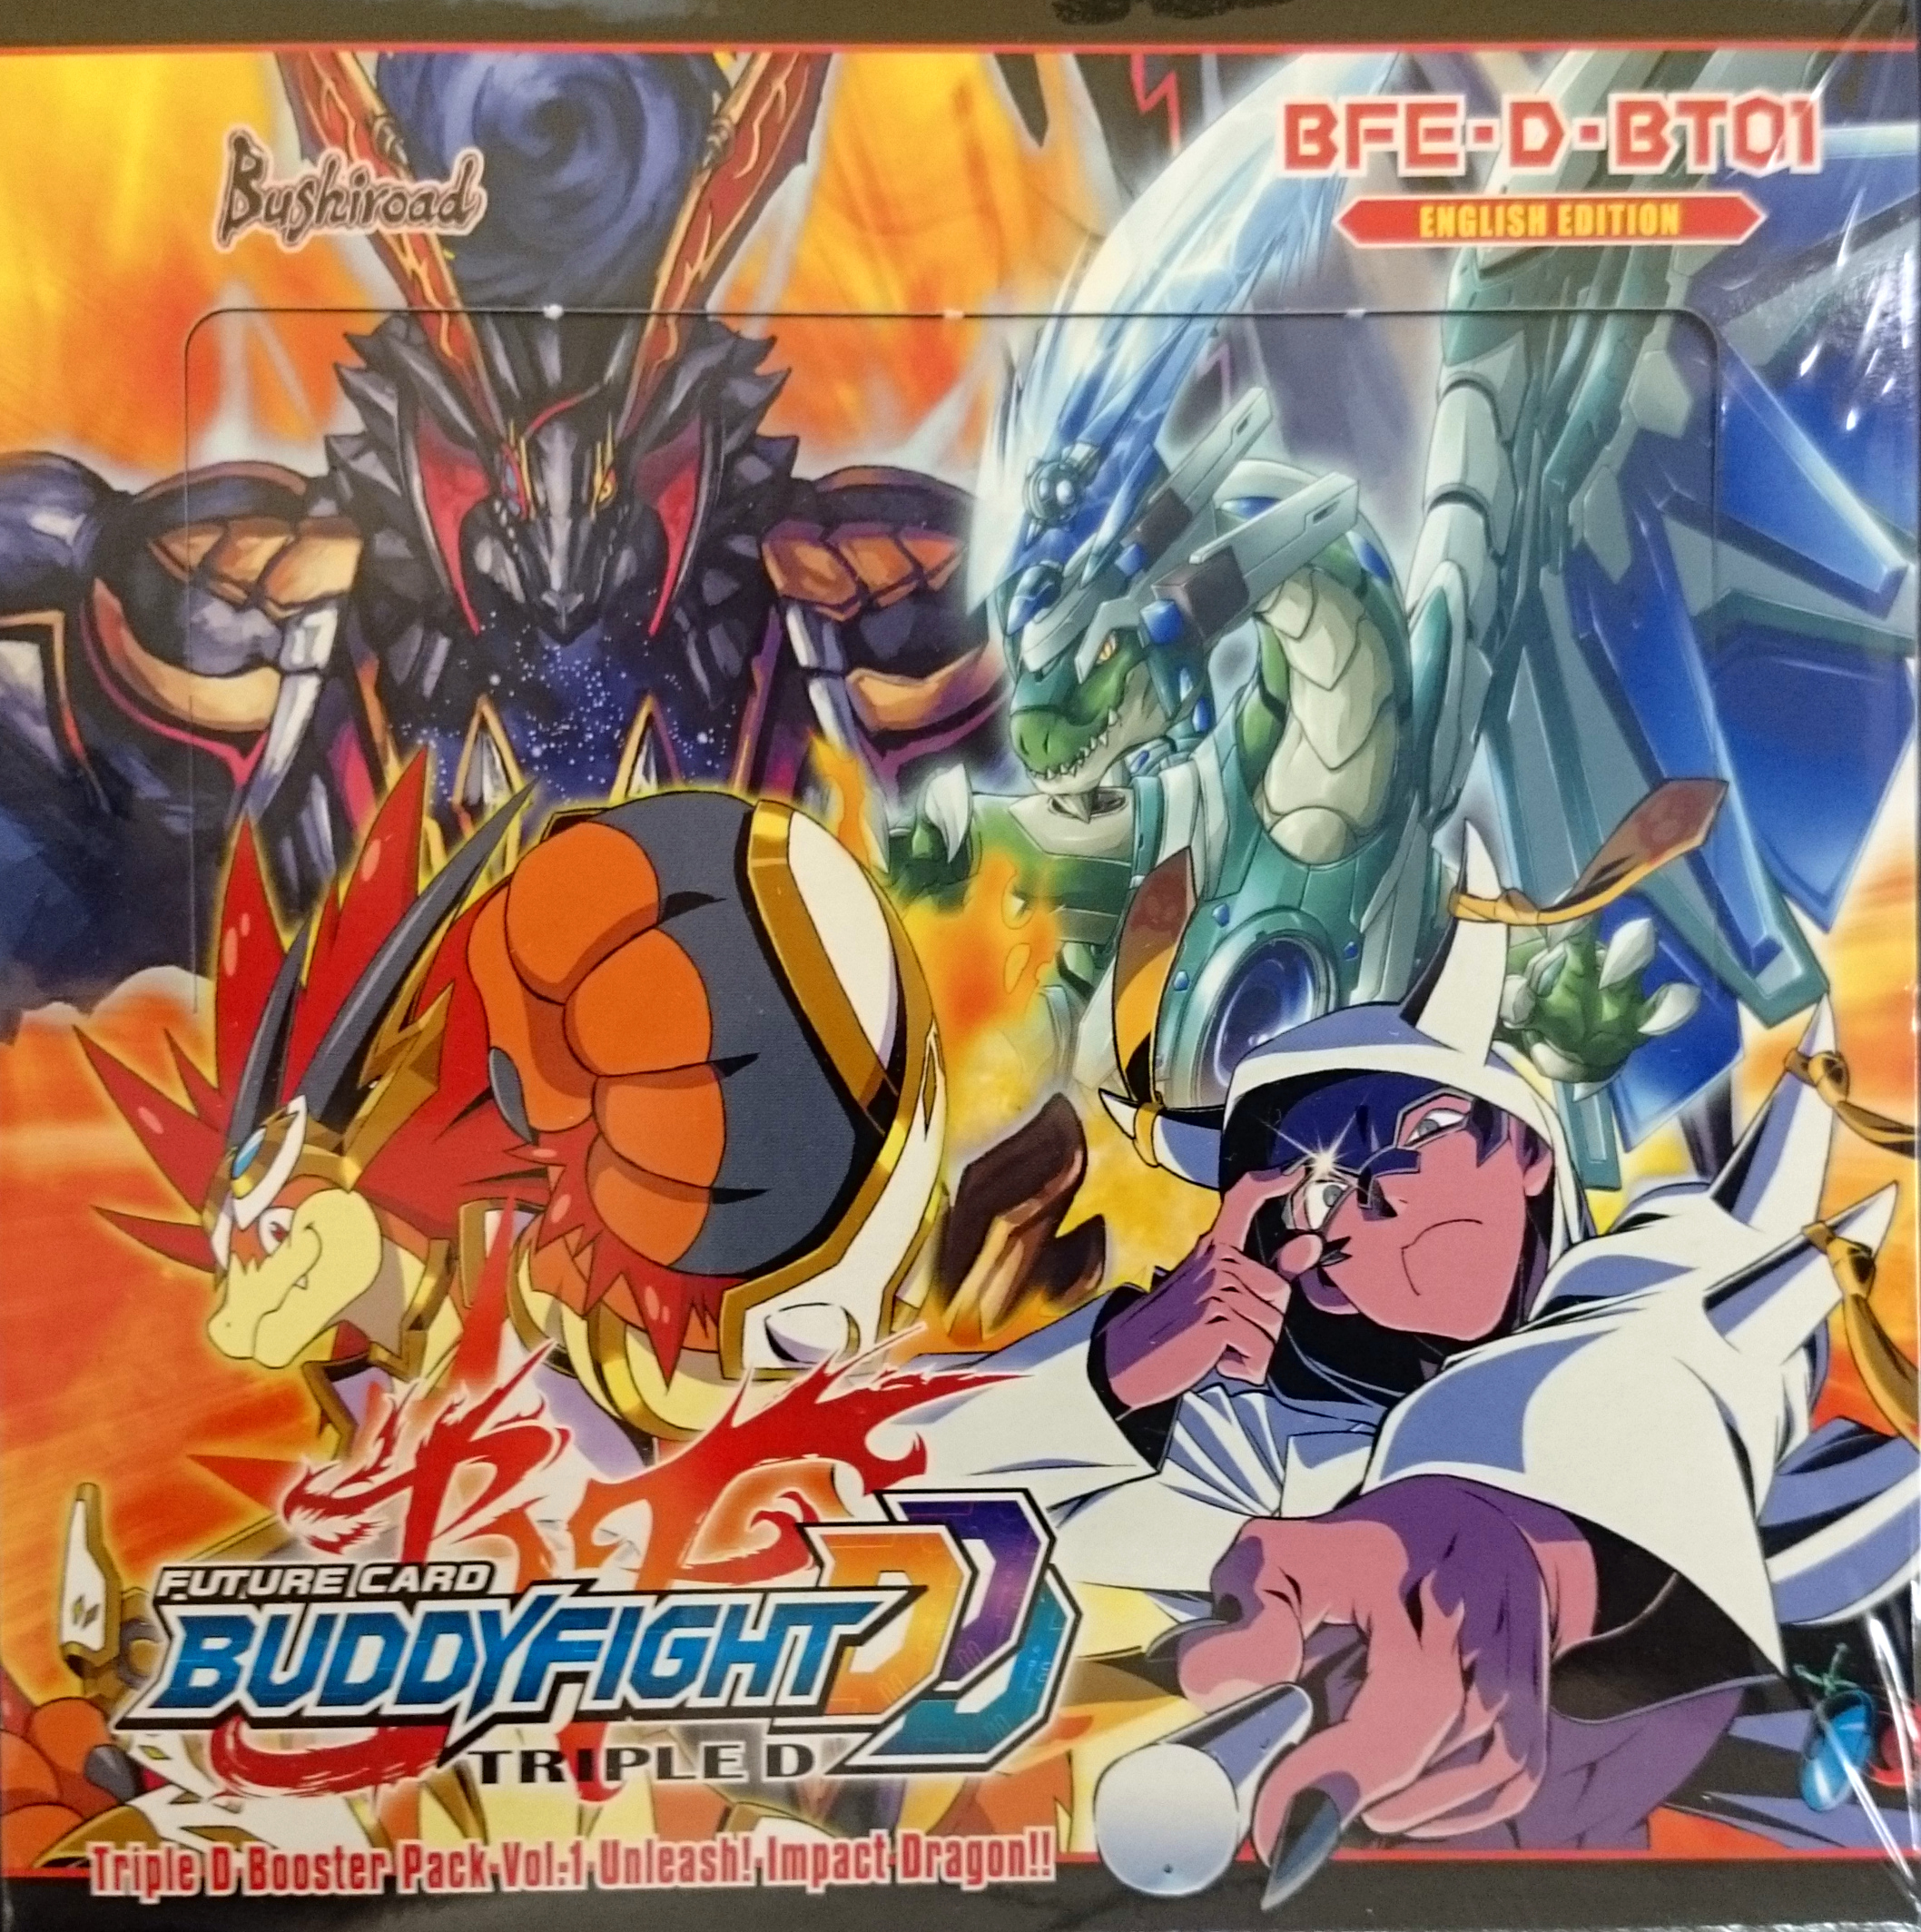 Buddyfight BFE-D-BT01 Unleash! Impact Dragon! Booster Box - Misc. CCG/TCG  Games » Buddyfight » Buddyfight Booster Boxes - Collector's Cache